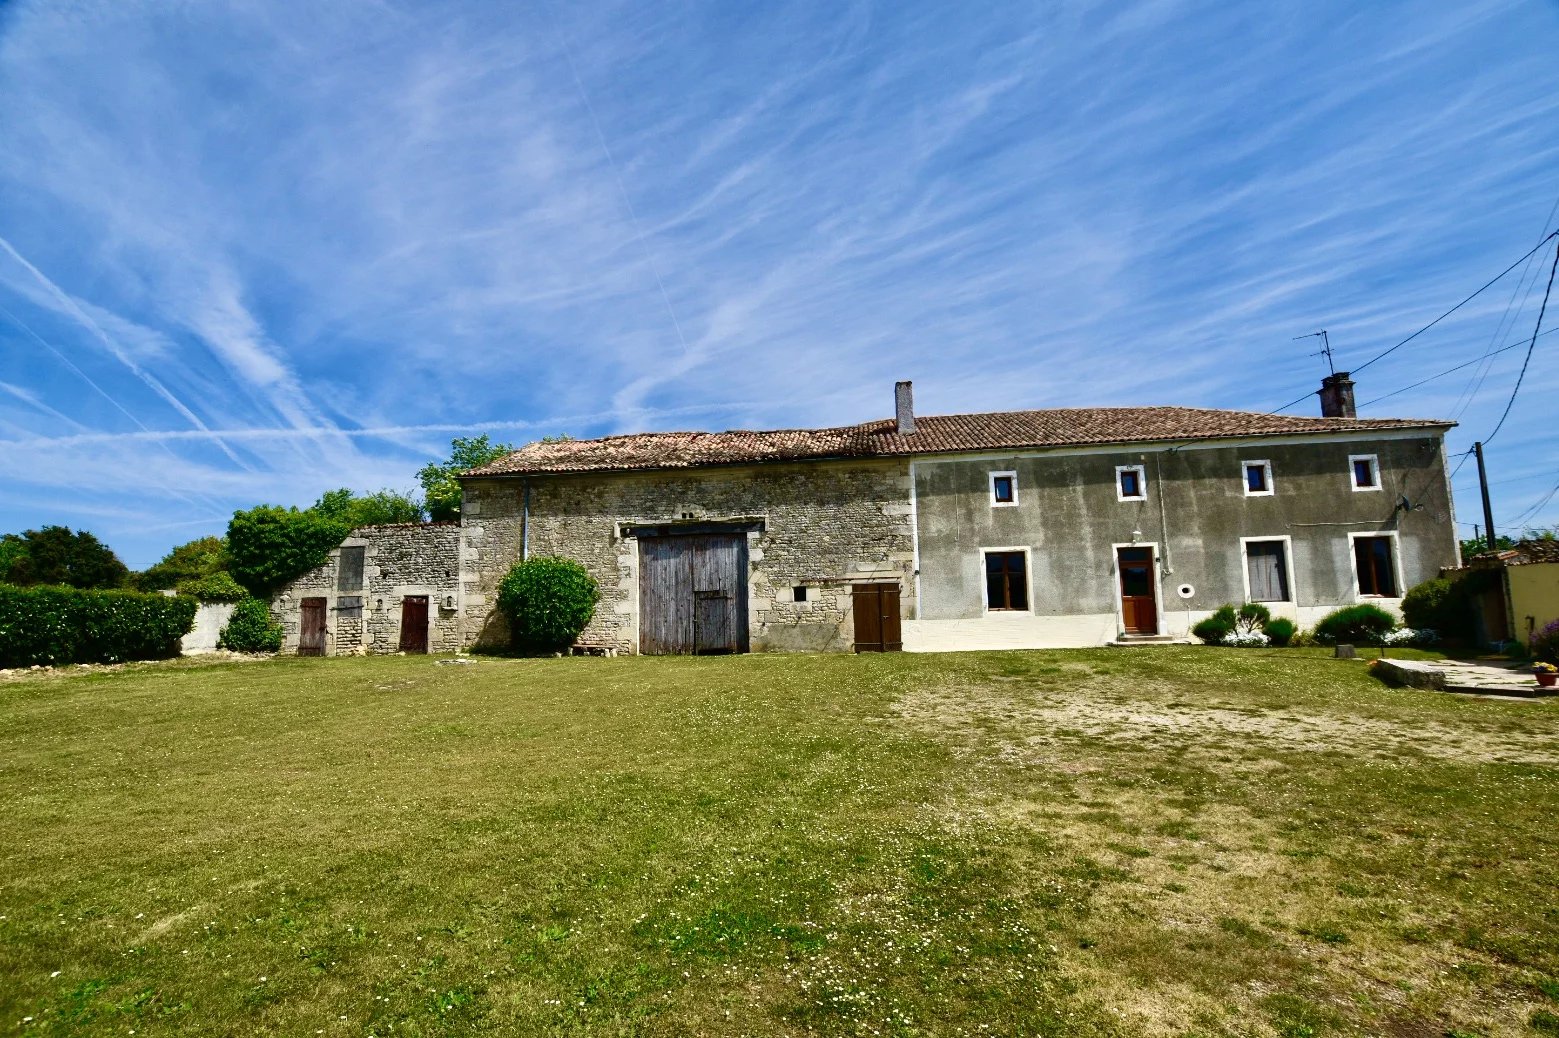 Renovated village house with guest house, outbuildings